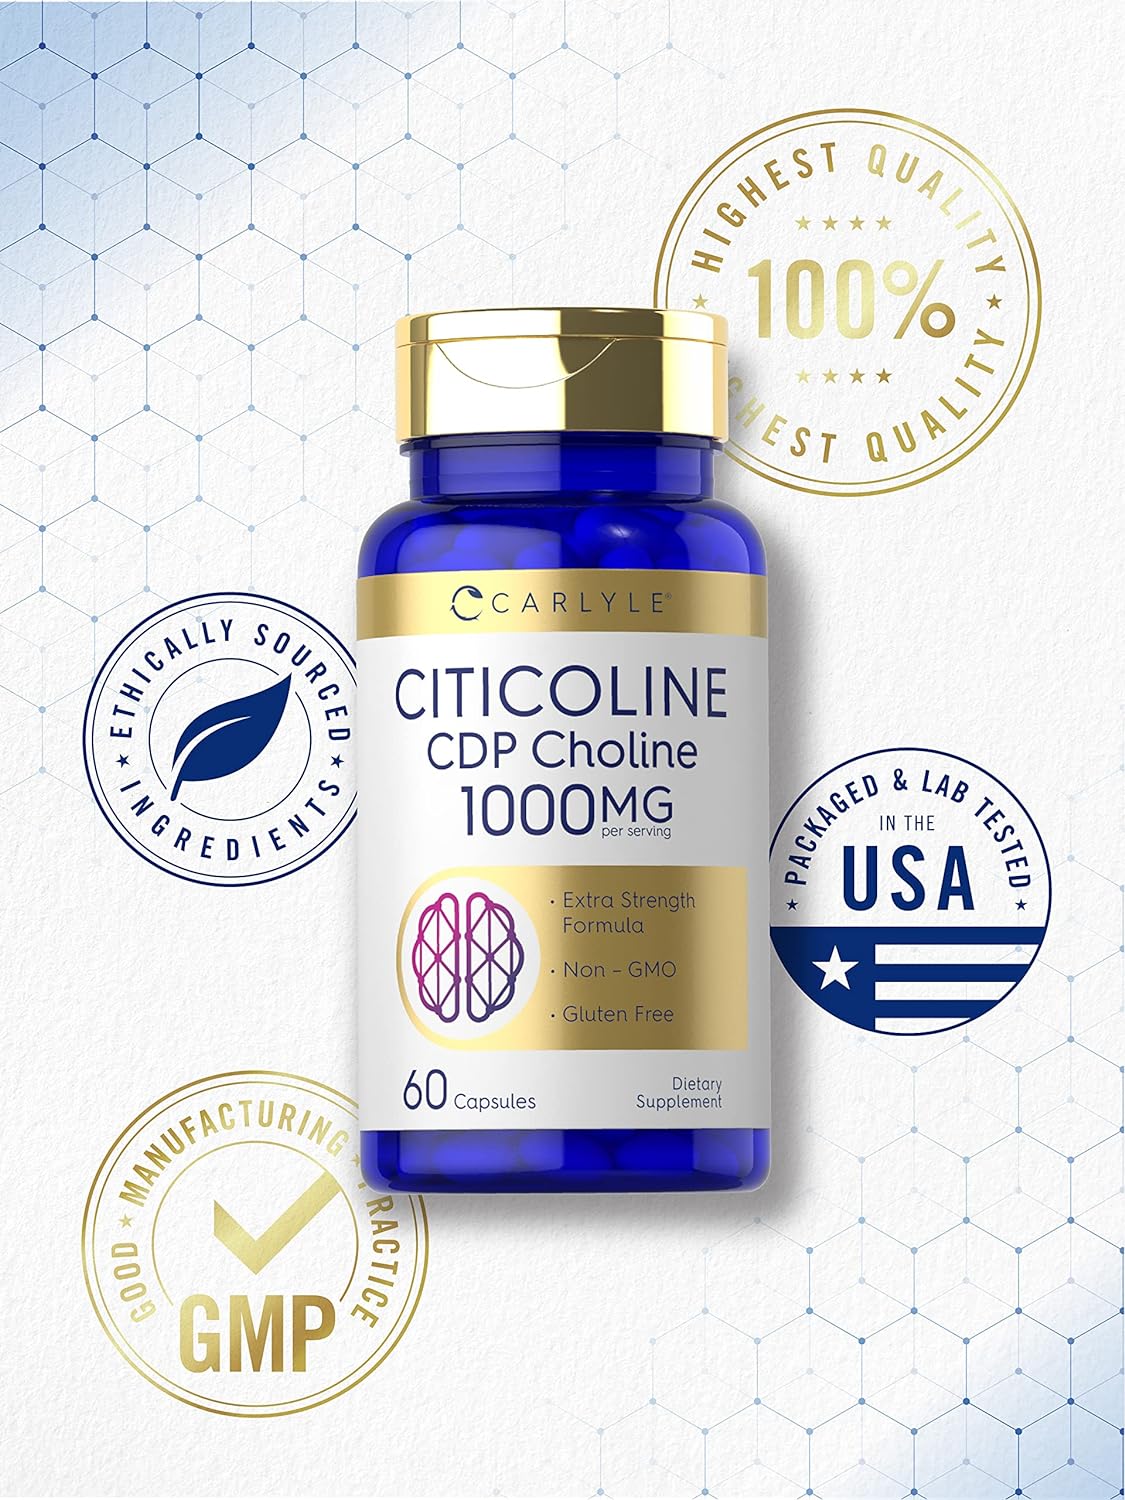 Carlyle Citicoline CDP Choline 1000mg | 60 Capsules | Non-GMO, Gluten Free Supplement : Health & Household